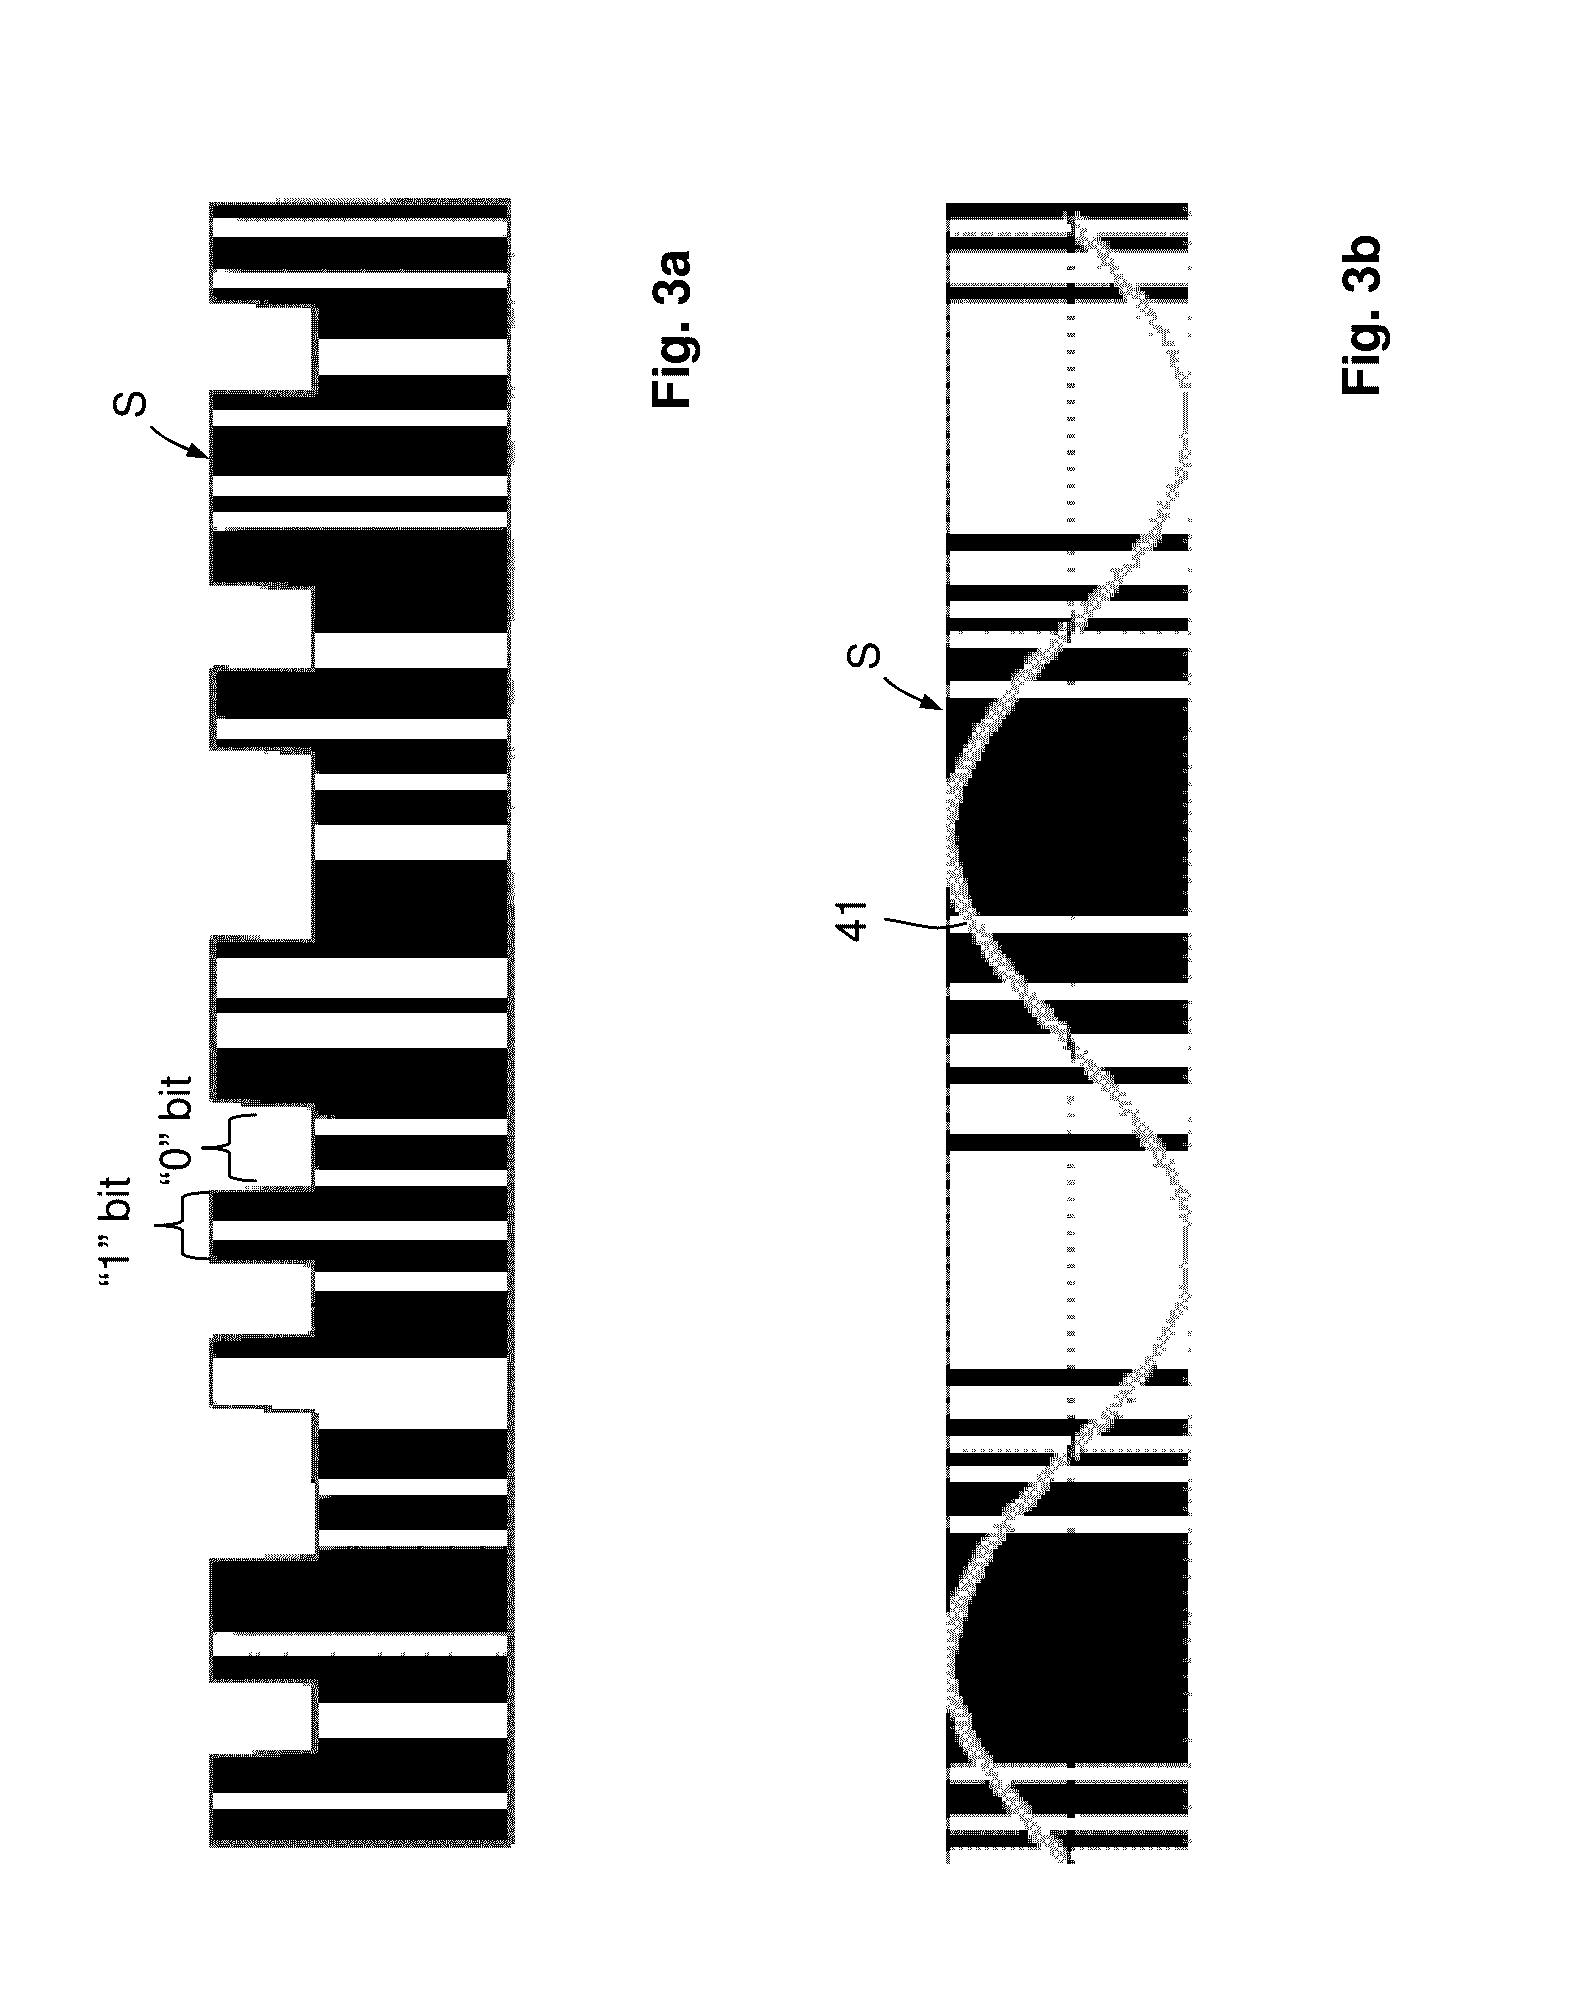 Method and Device for Creating a Control Channel in an Optical Transmission Signal and Method and Device for Extracting the Information Included Therein